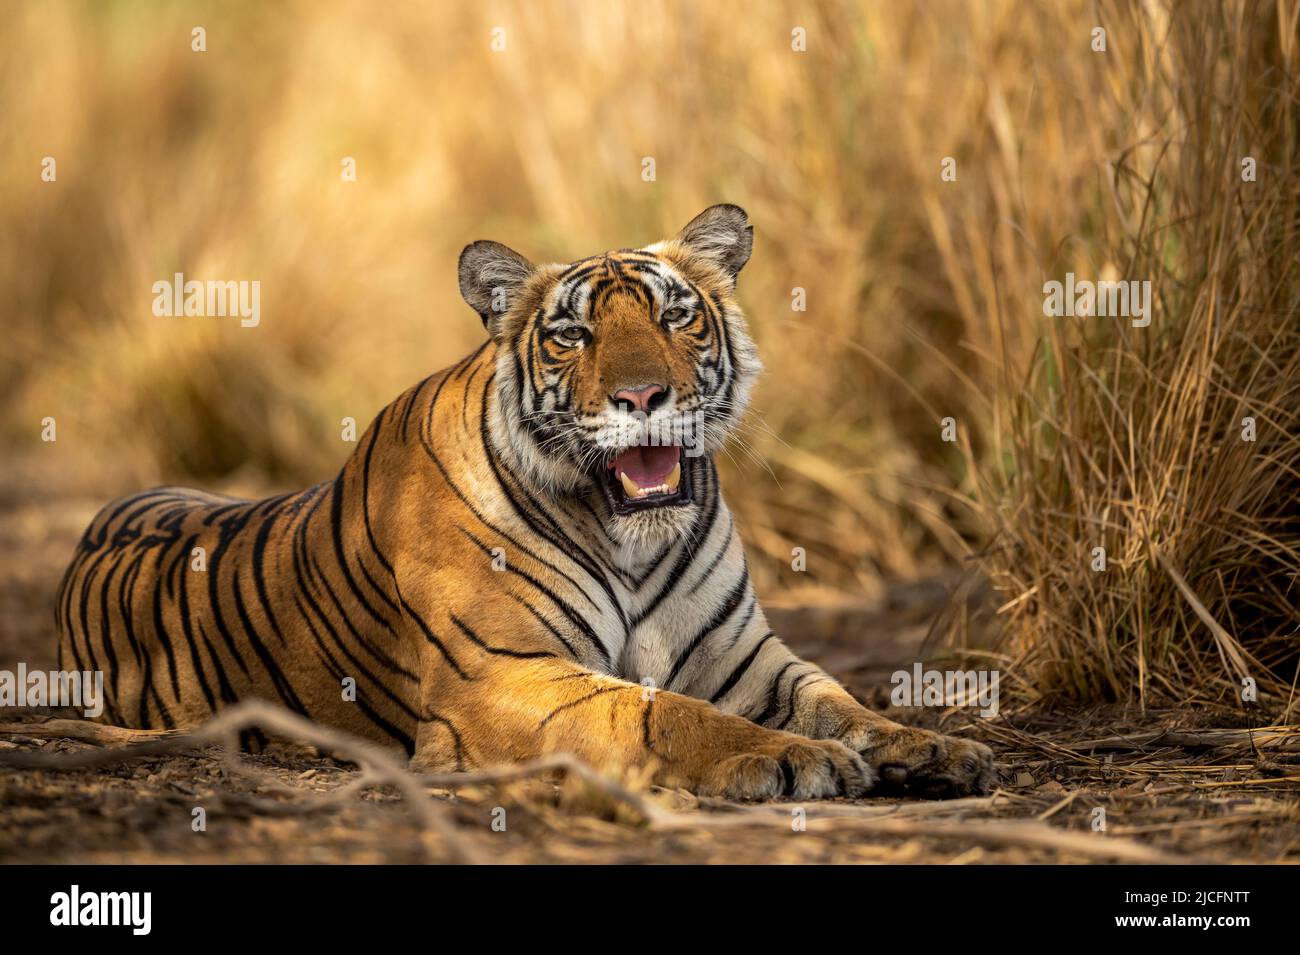 eye level shot of wild female bengal tiger or tigress close up or portrait with eye contact in hot summer season safari at ranthambore national park Stock Photo